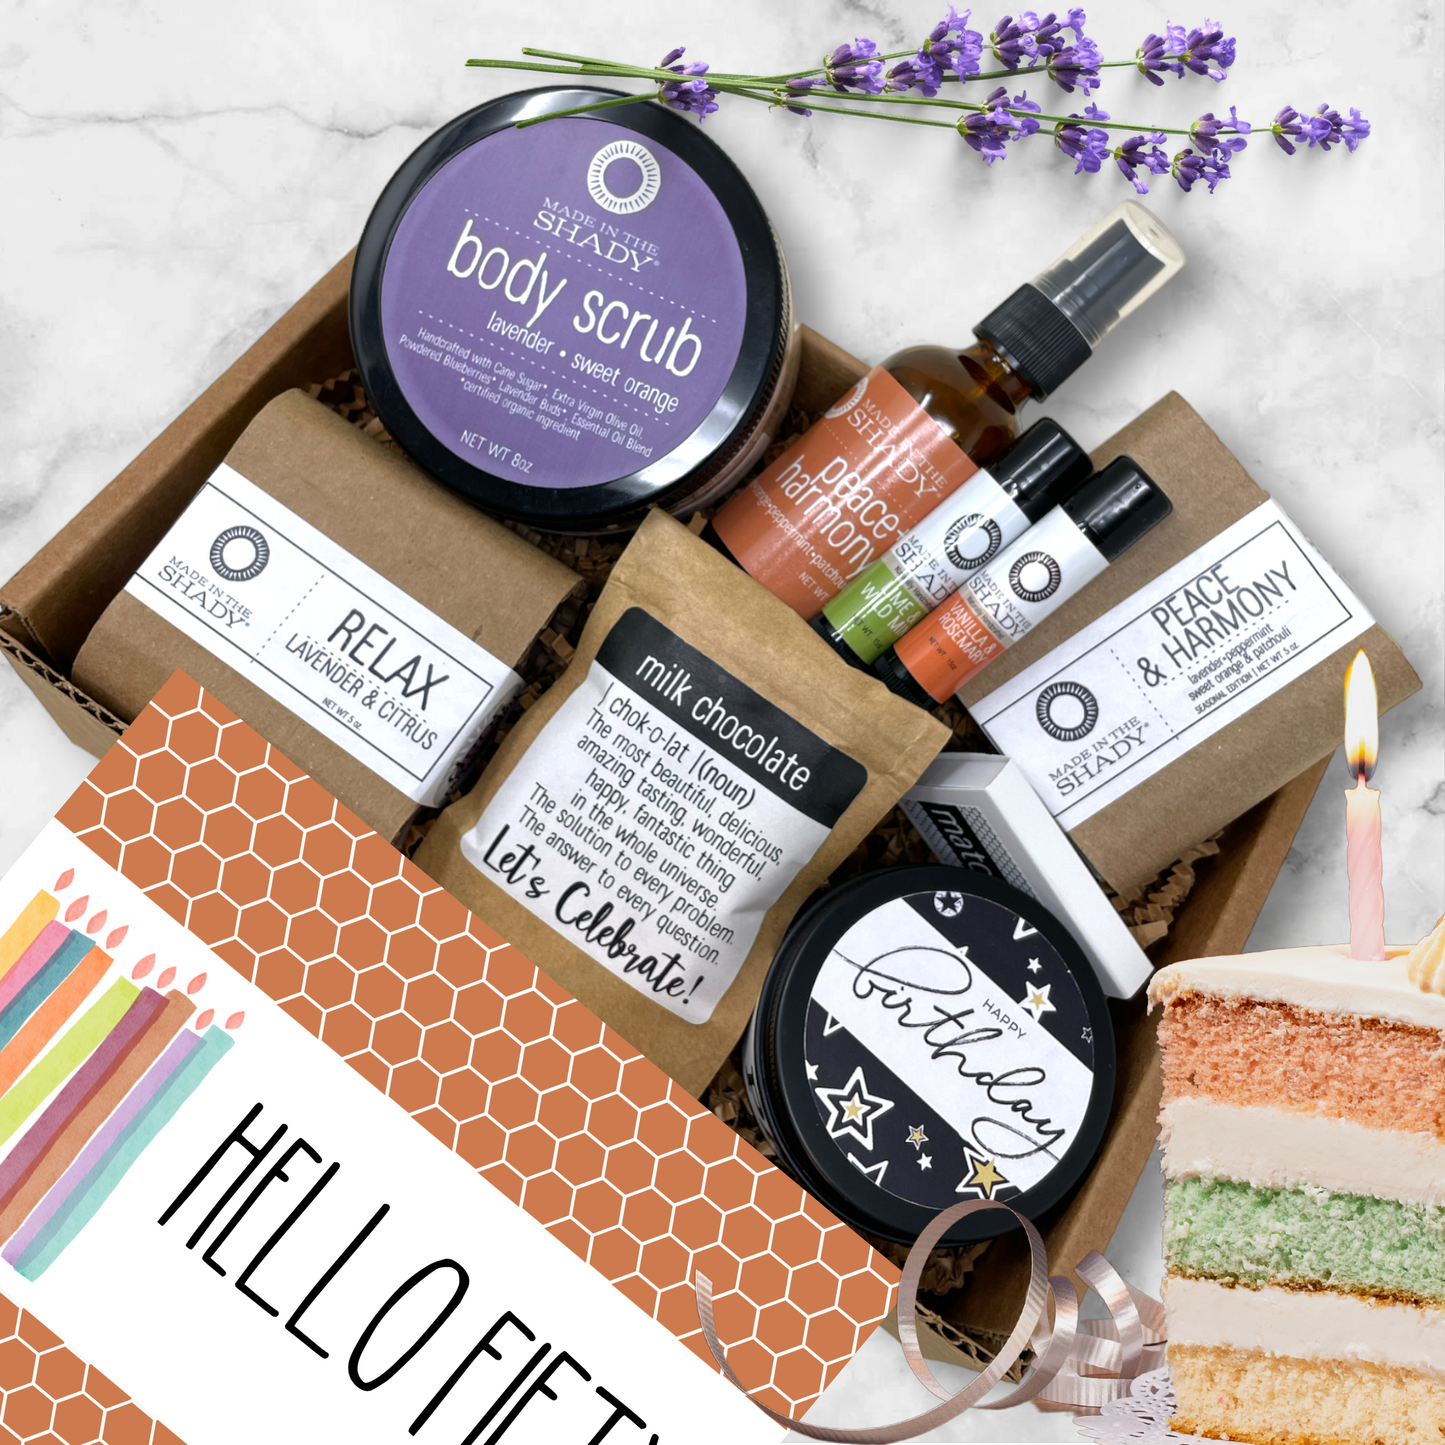 50th Ultimate Birthday Gift Self Care Package • Fiftieth Birthday Gift • Hello Fifty Est 1974 (9PC)